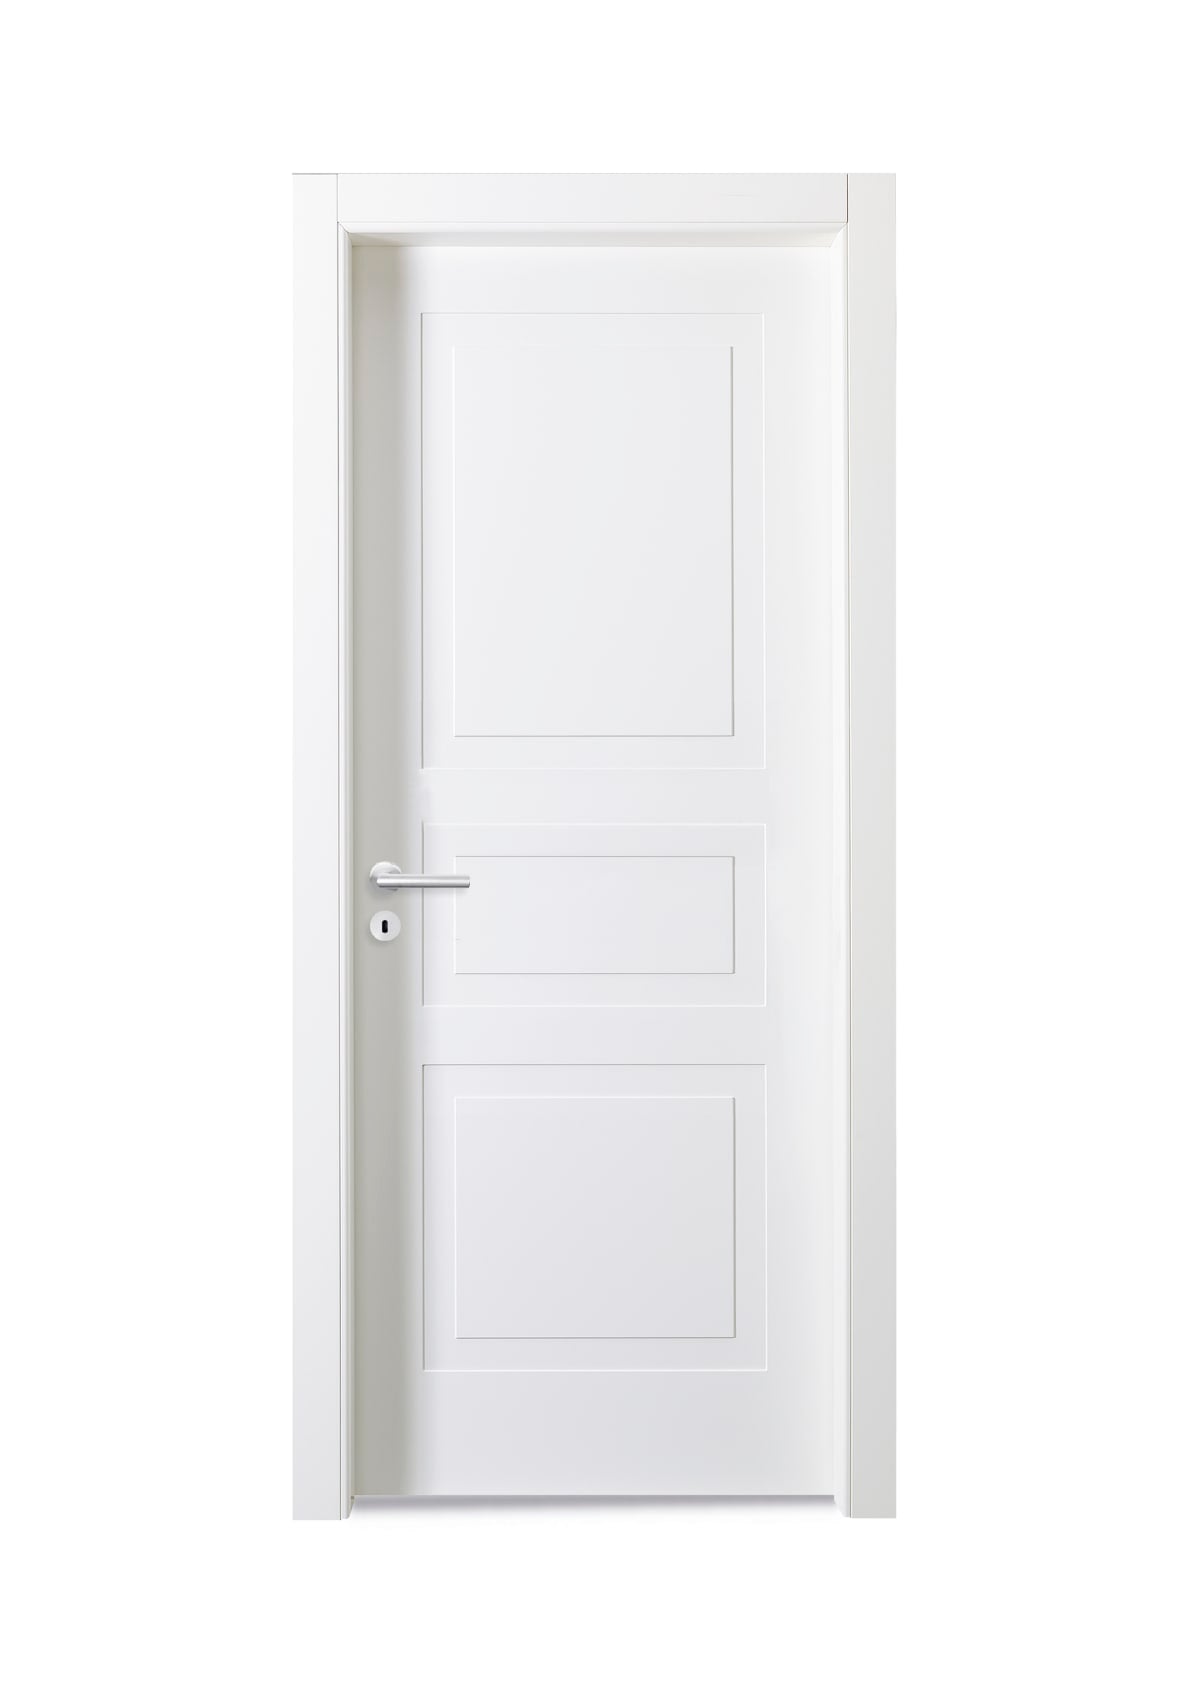 CLASS REVERSIBLE HINGED DOOR 210X60 WHITE LACQUERED